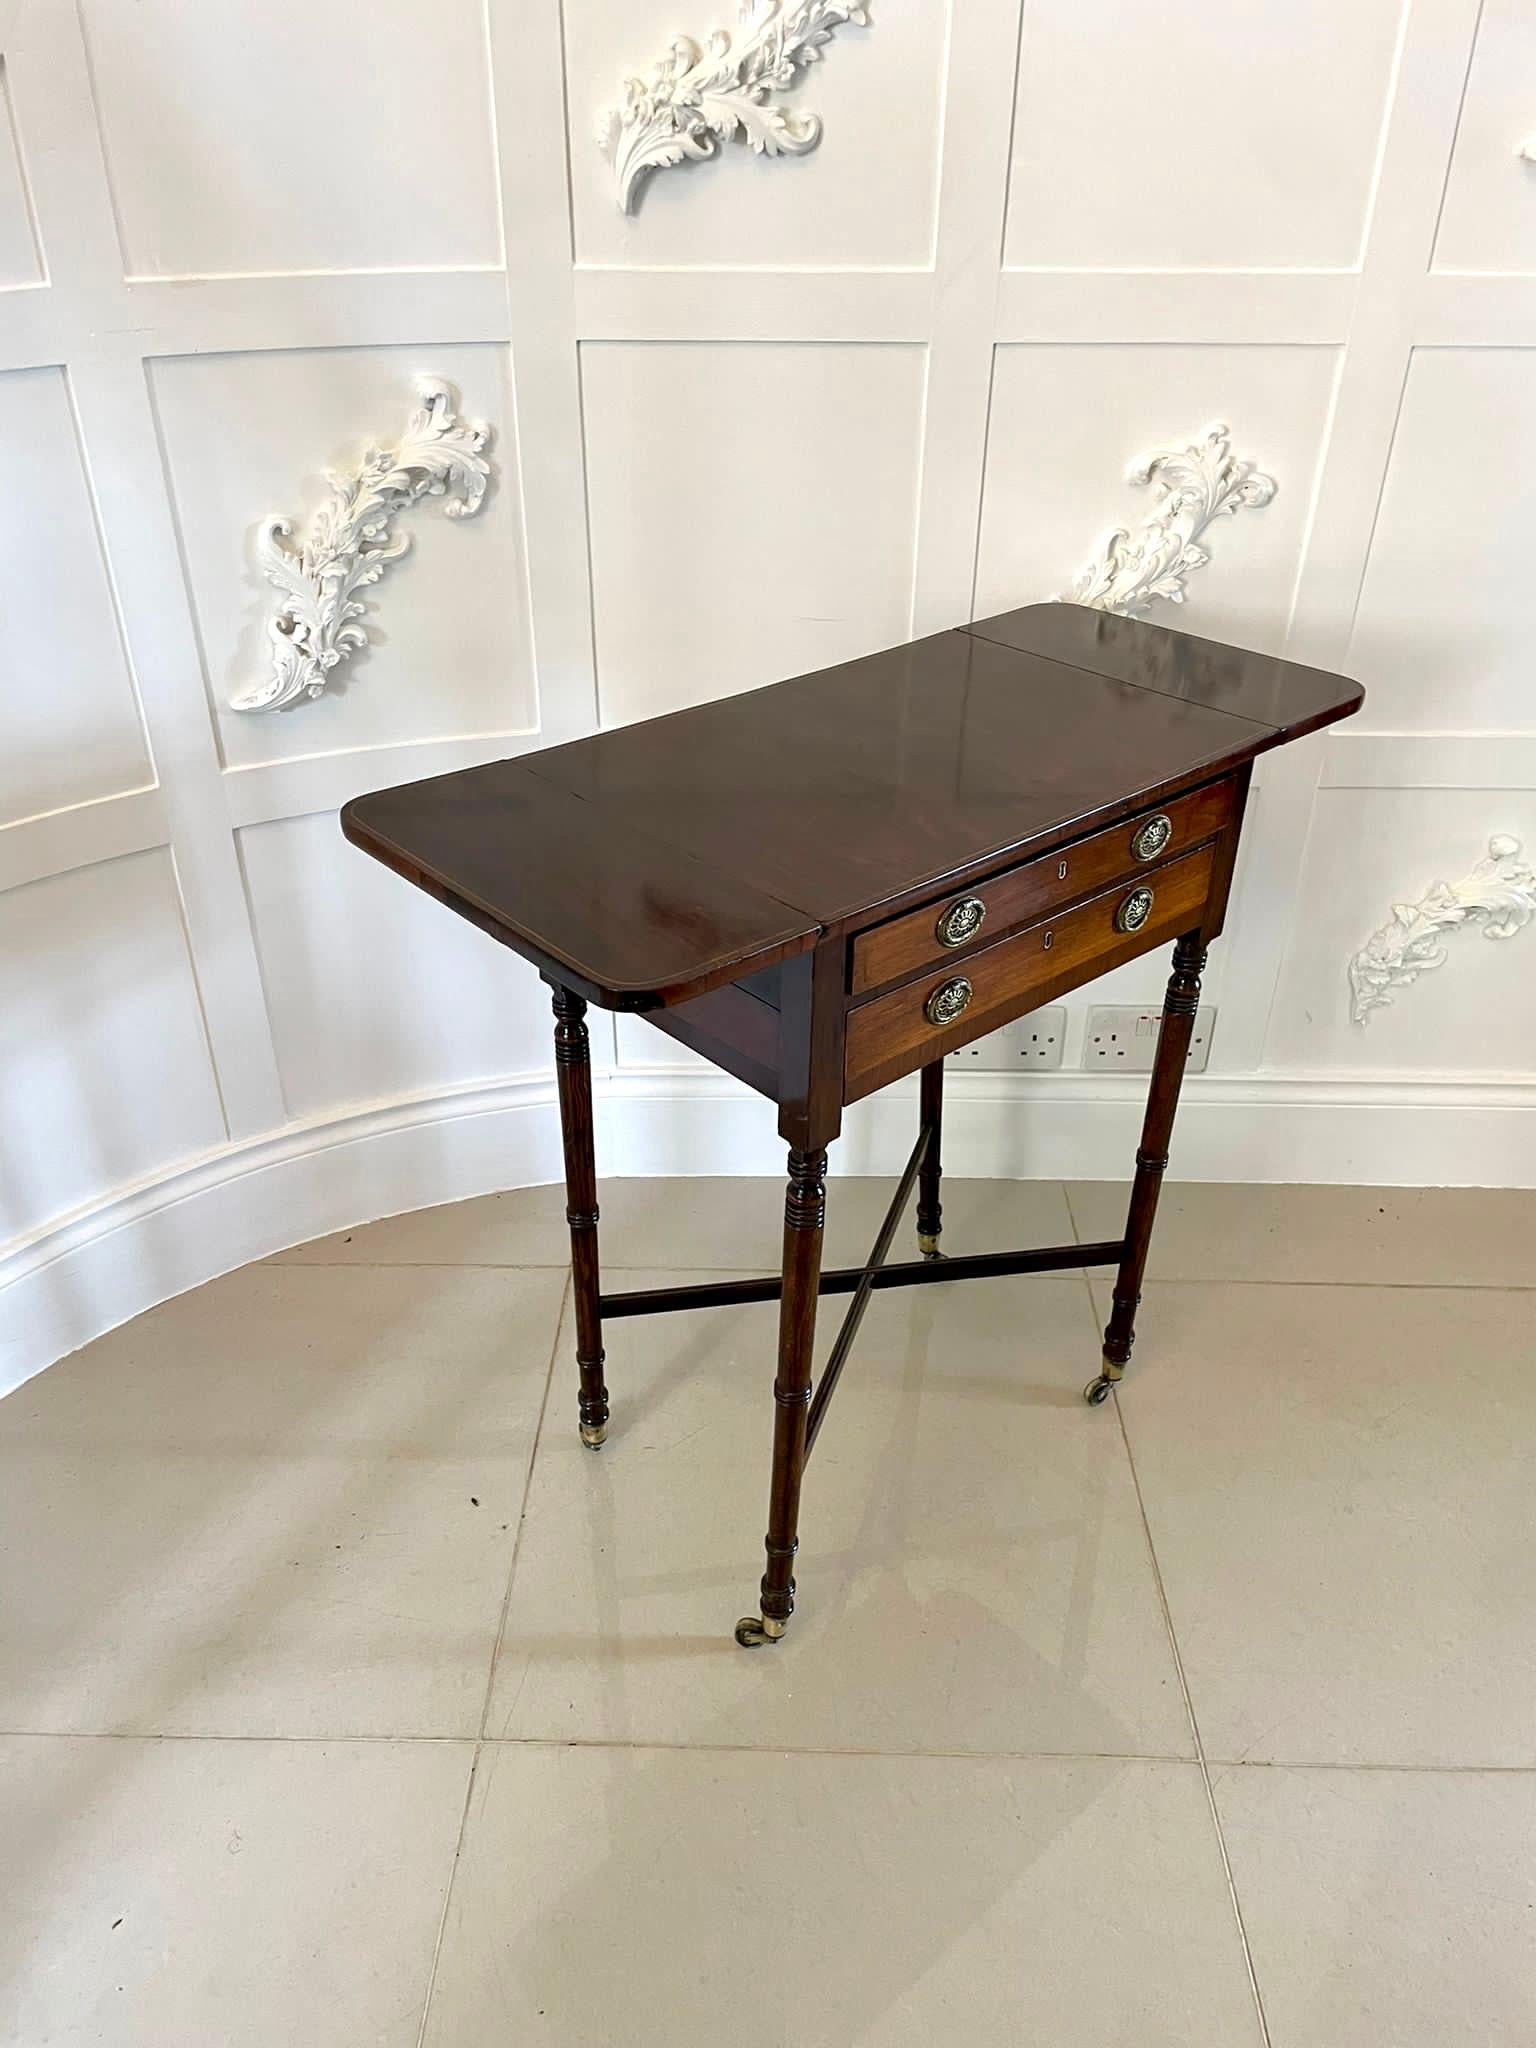 Antique Quality Rosewood Freestanding Drop Leaf Lamp Table by Druce & Co London In Good Condition For Sale In Suffolk, GB